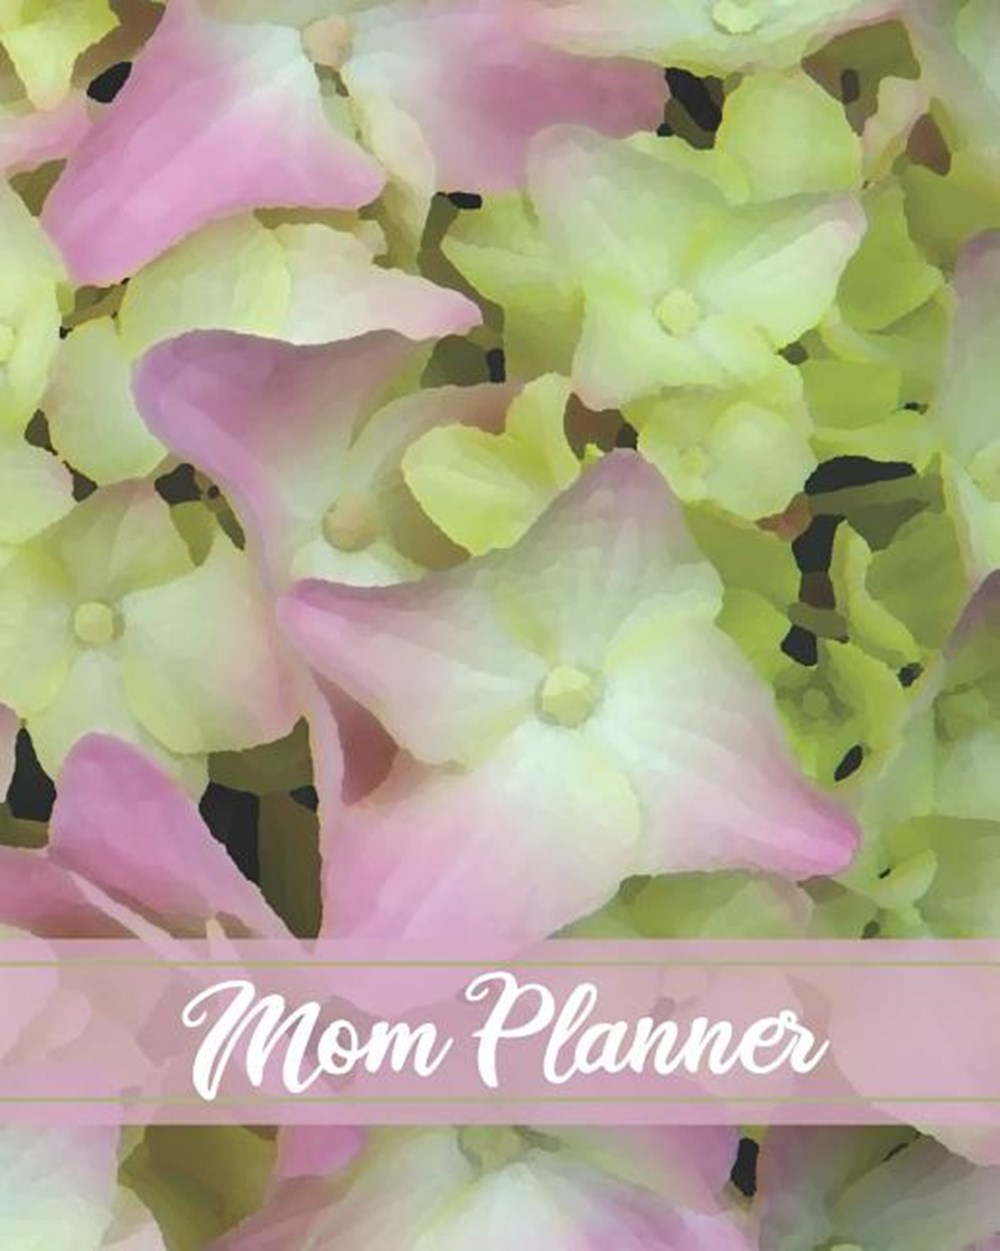 Mom Planner Weekly Organizer for Busy Families - Pink Hydrangea Flowers